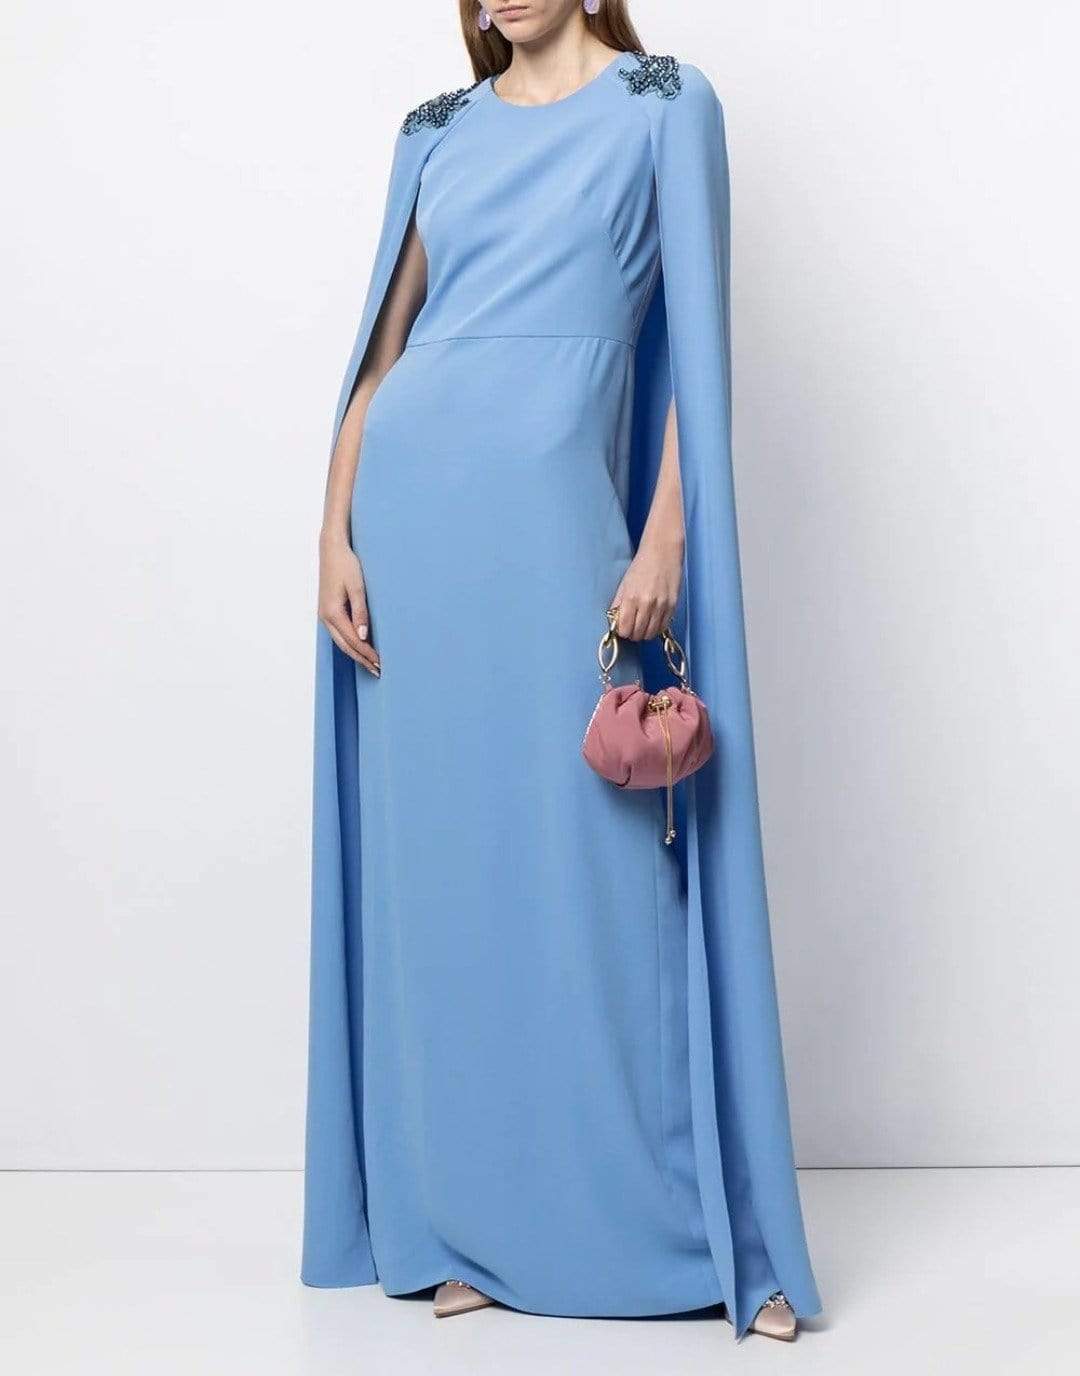 MARCHESA NOTTE-Dusty Blue Embroidered Cape Dress-